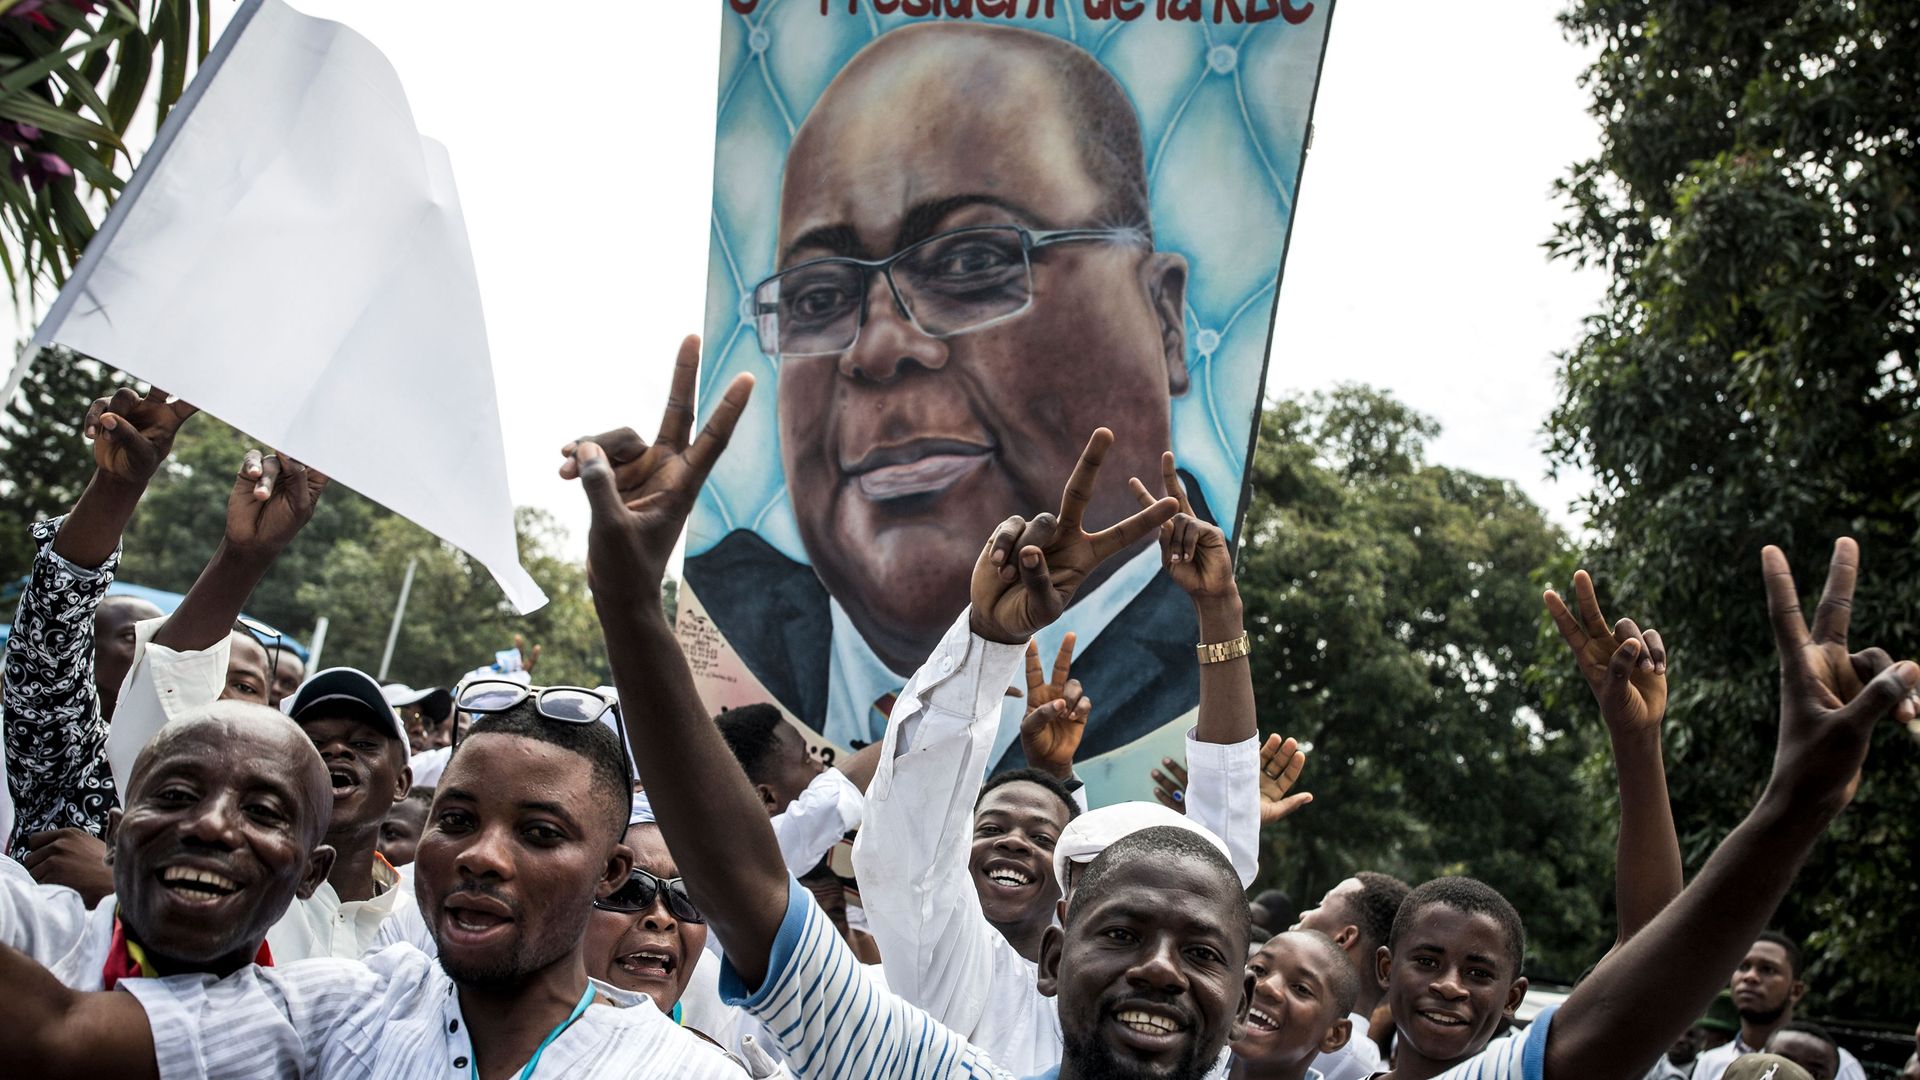 Supporters of new elected President of the Democratic Republic of Congo Felix Tshisekedi during his inauguration ceremony  on in Kinshasa. 